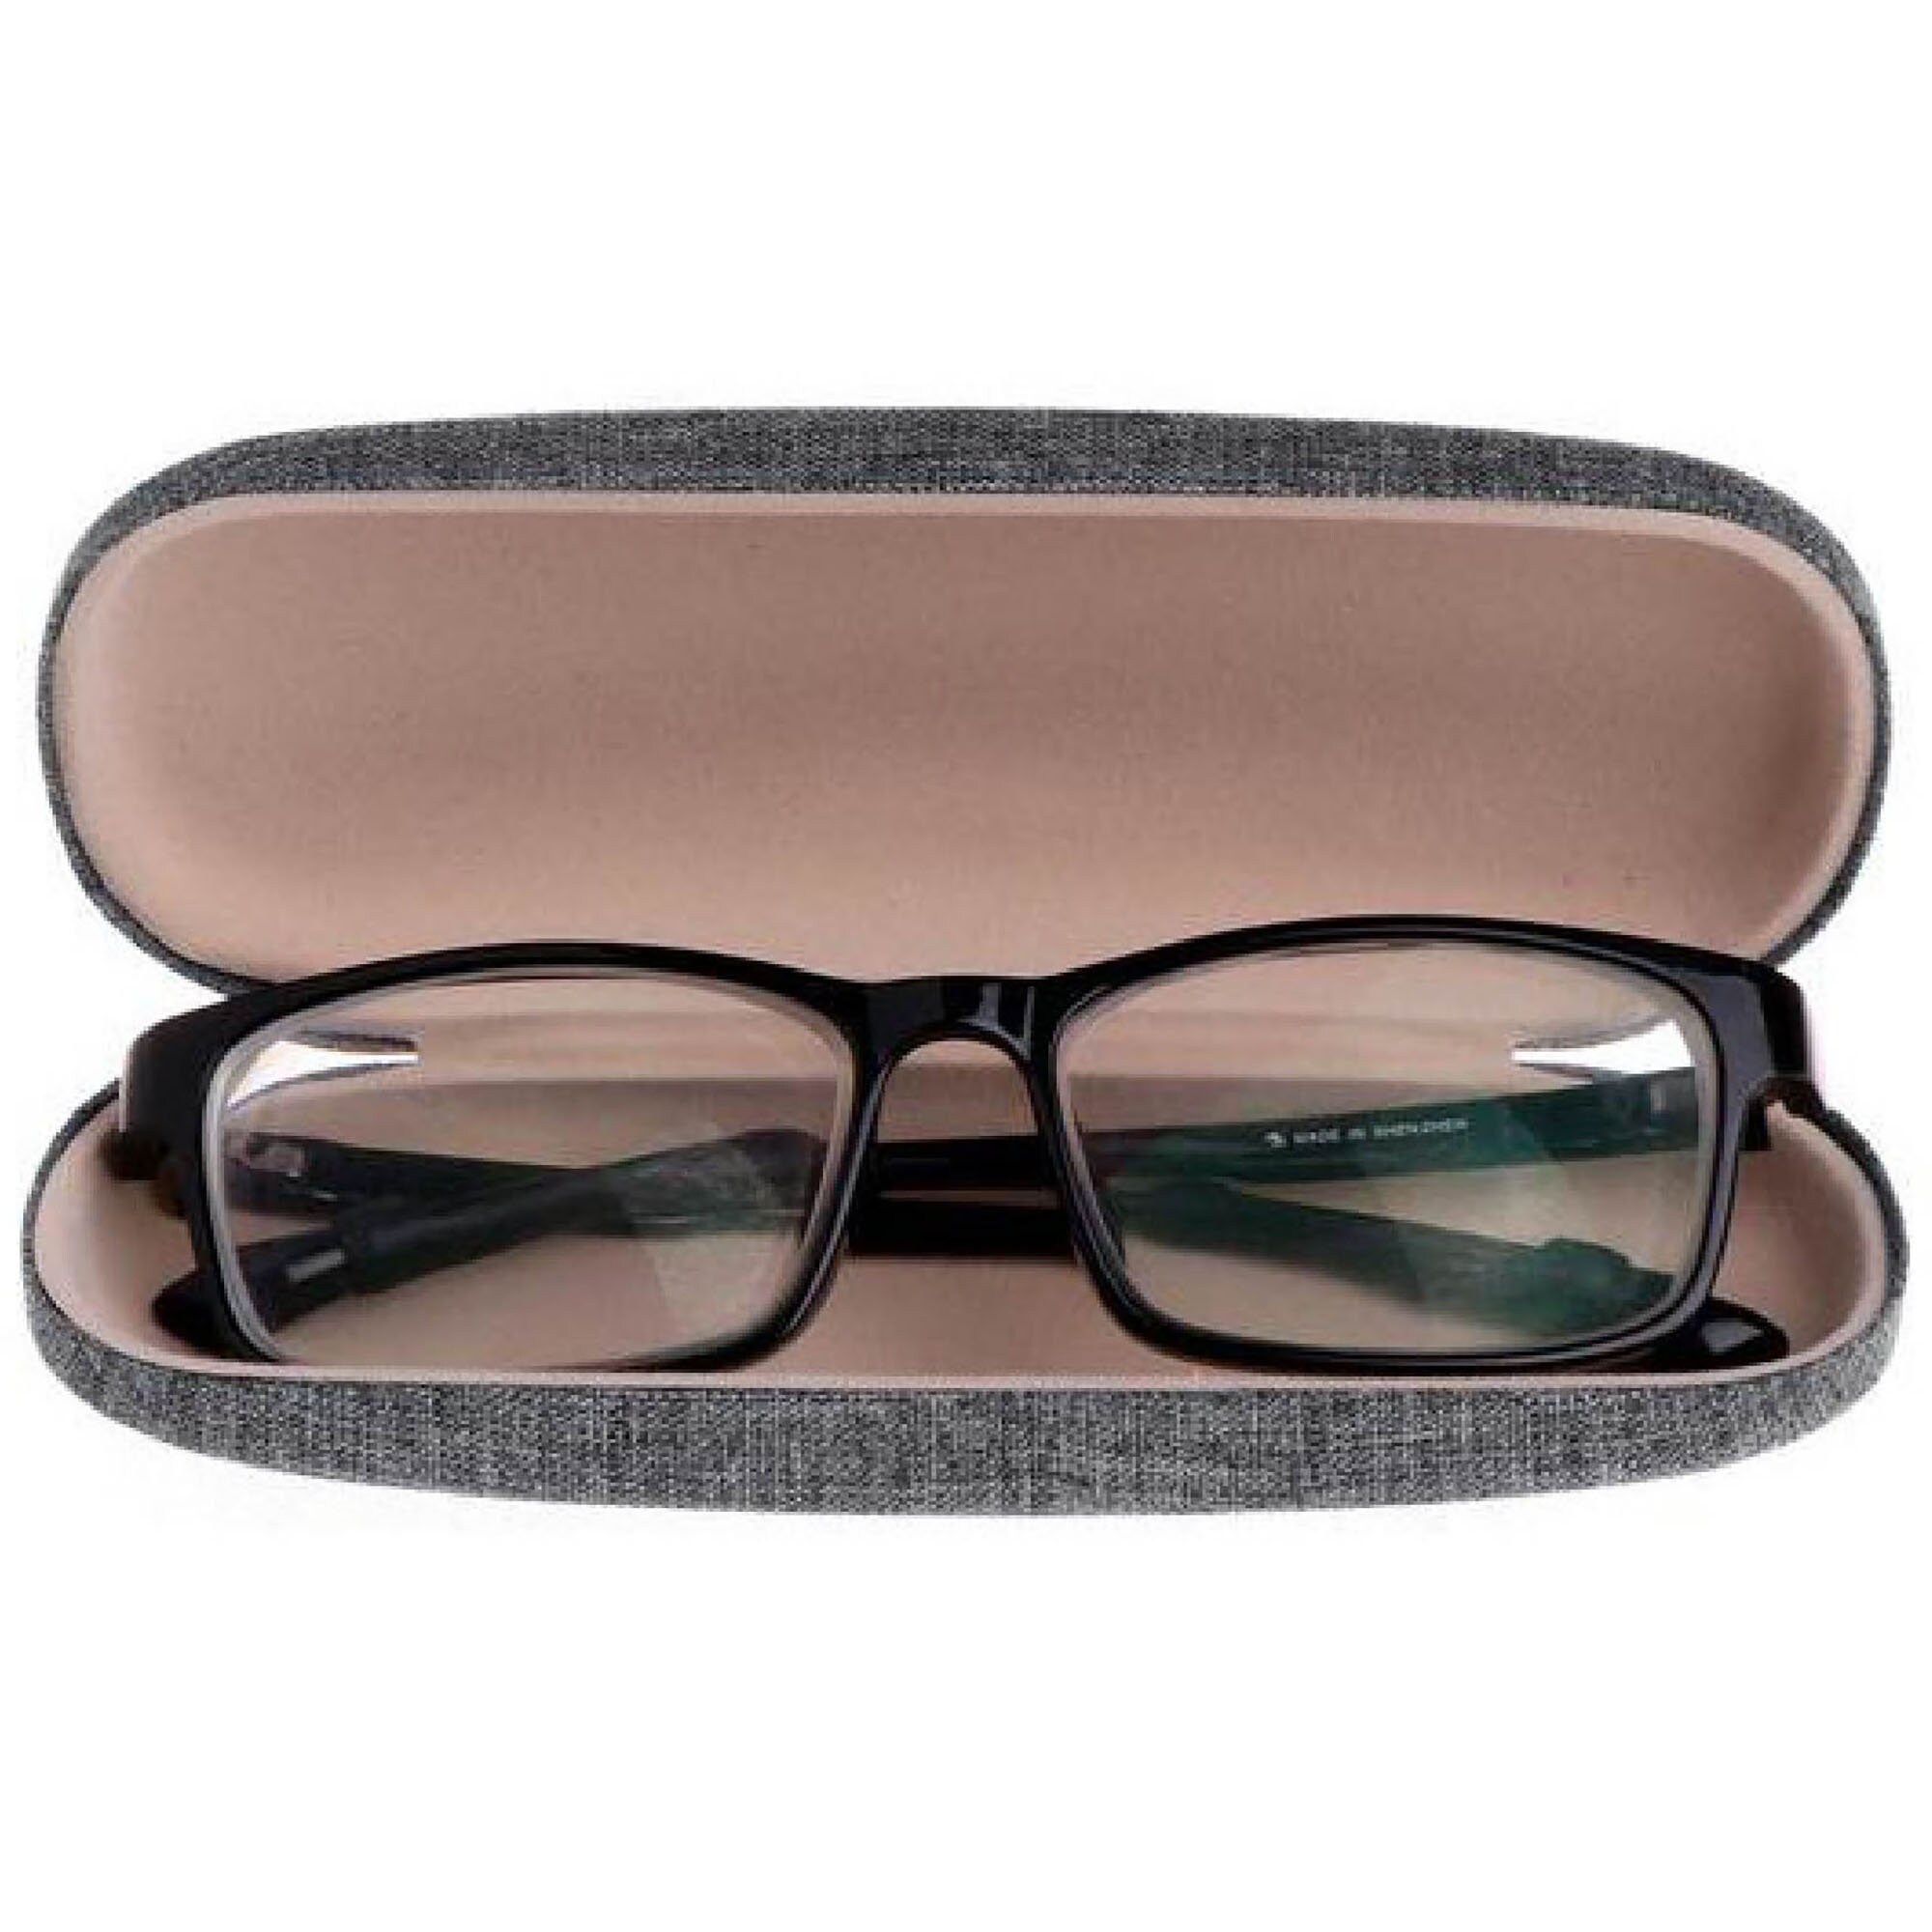 Mother and Daughter Spectacle Case Two Women Hard Glasses Case Lovers Sunglasses Case. Sisters Reading Eyeglasses Case